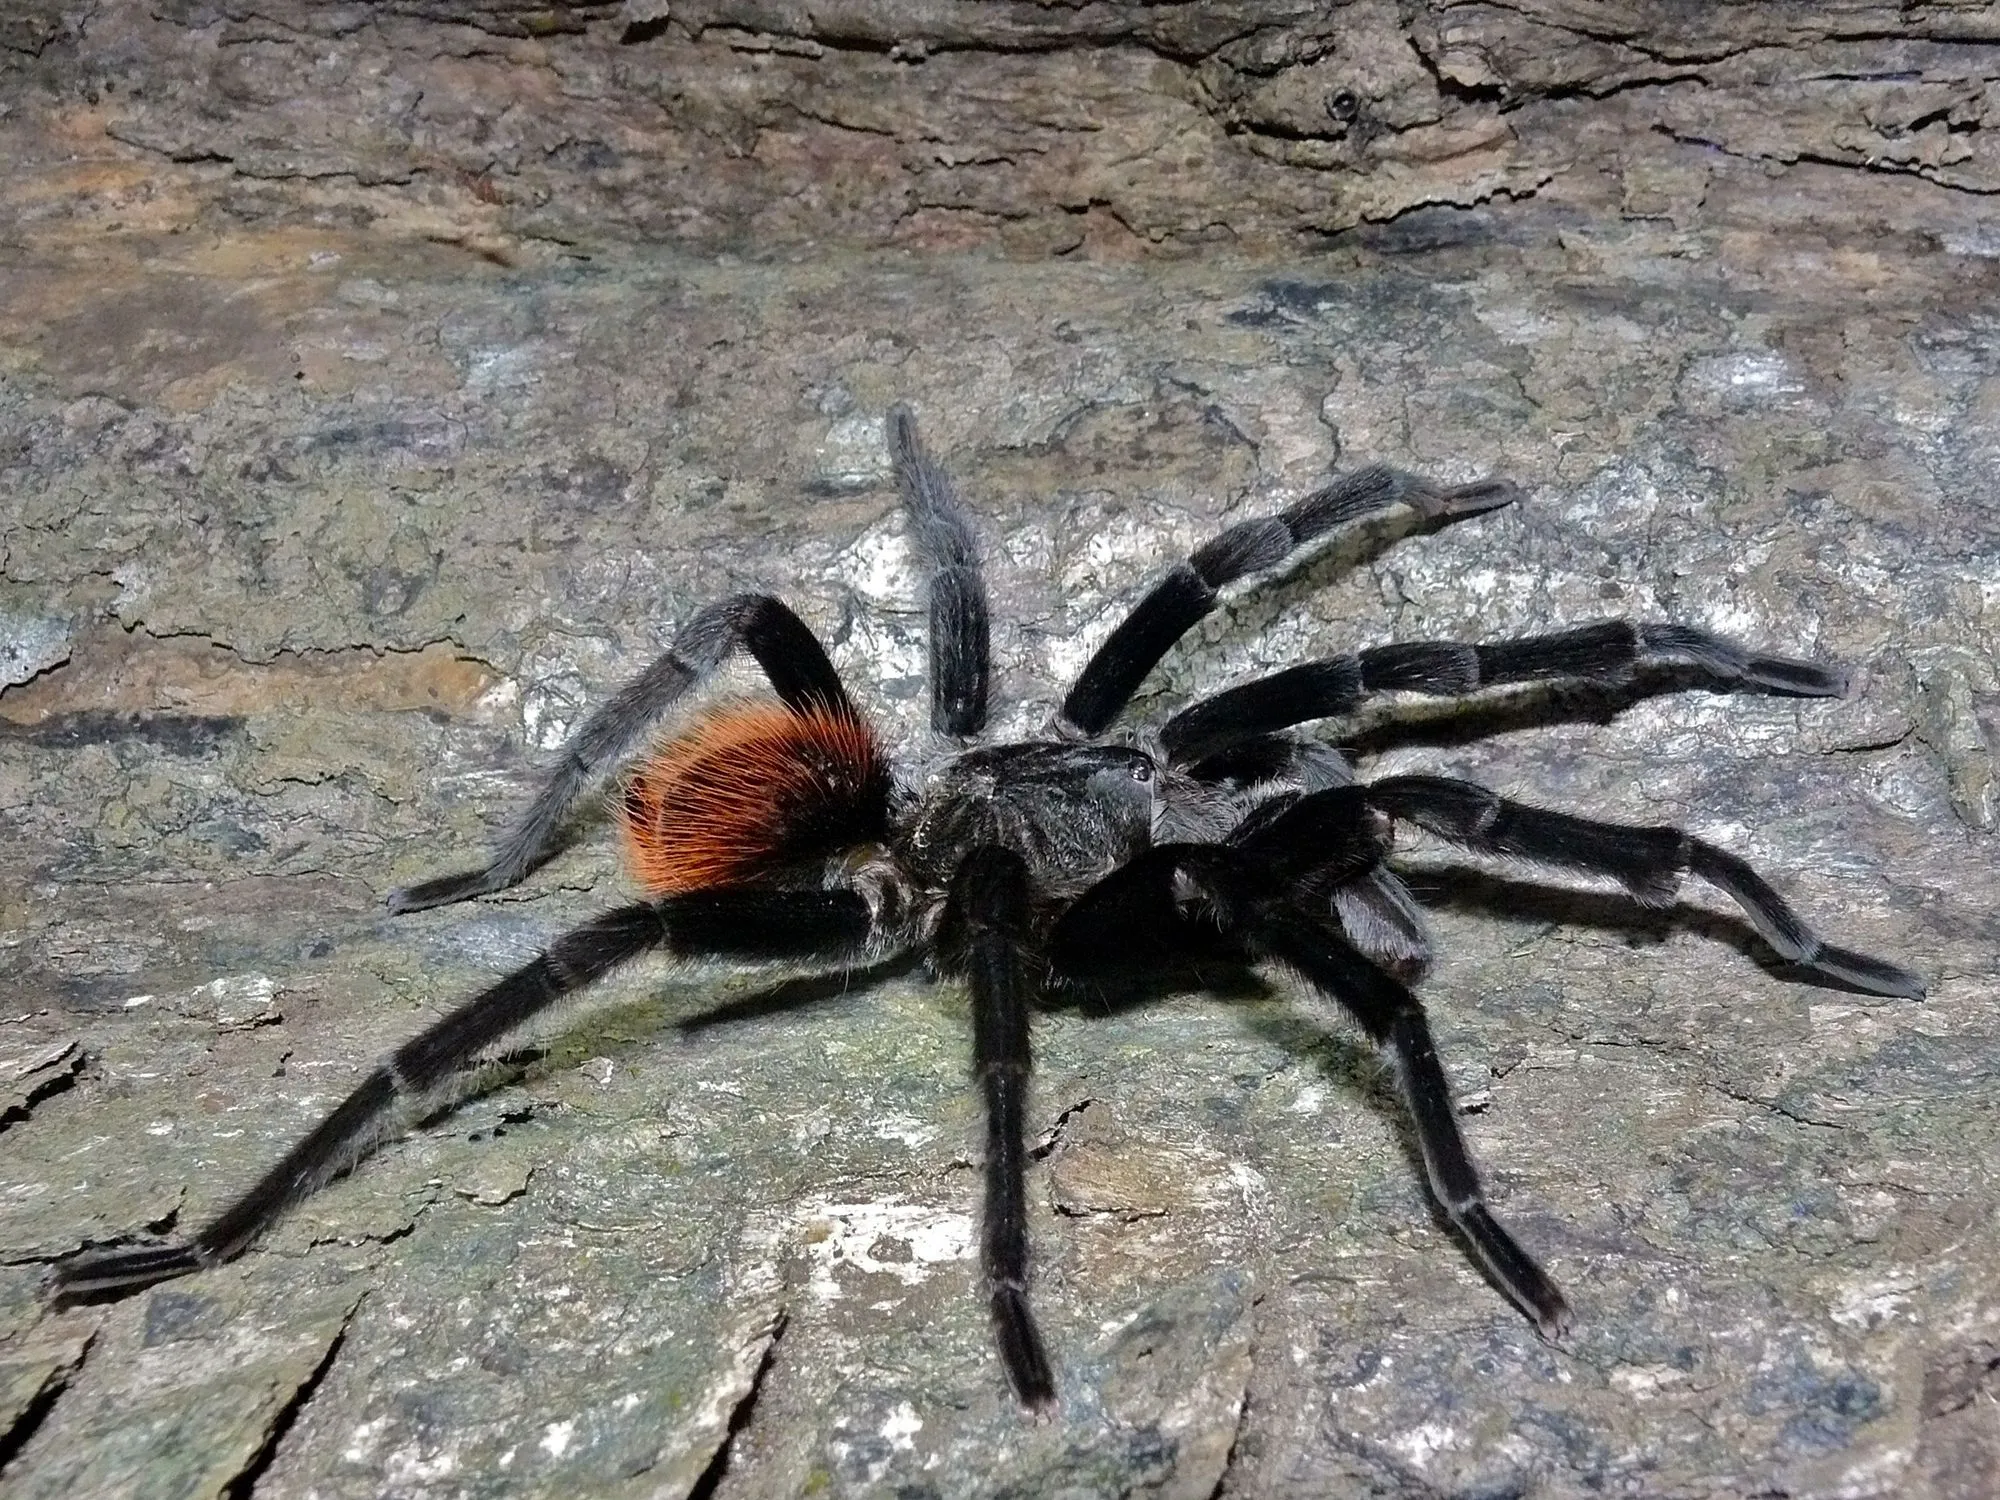 The Mexican red rump tarantula, Brachypelma vagans, is velvet black in color with bright red hairs on its abdomen and legs.